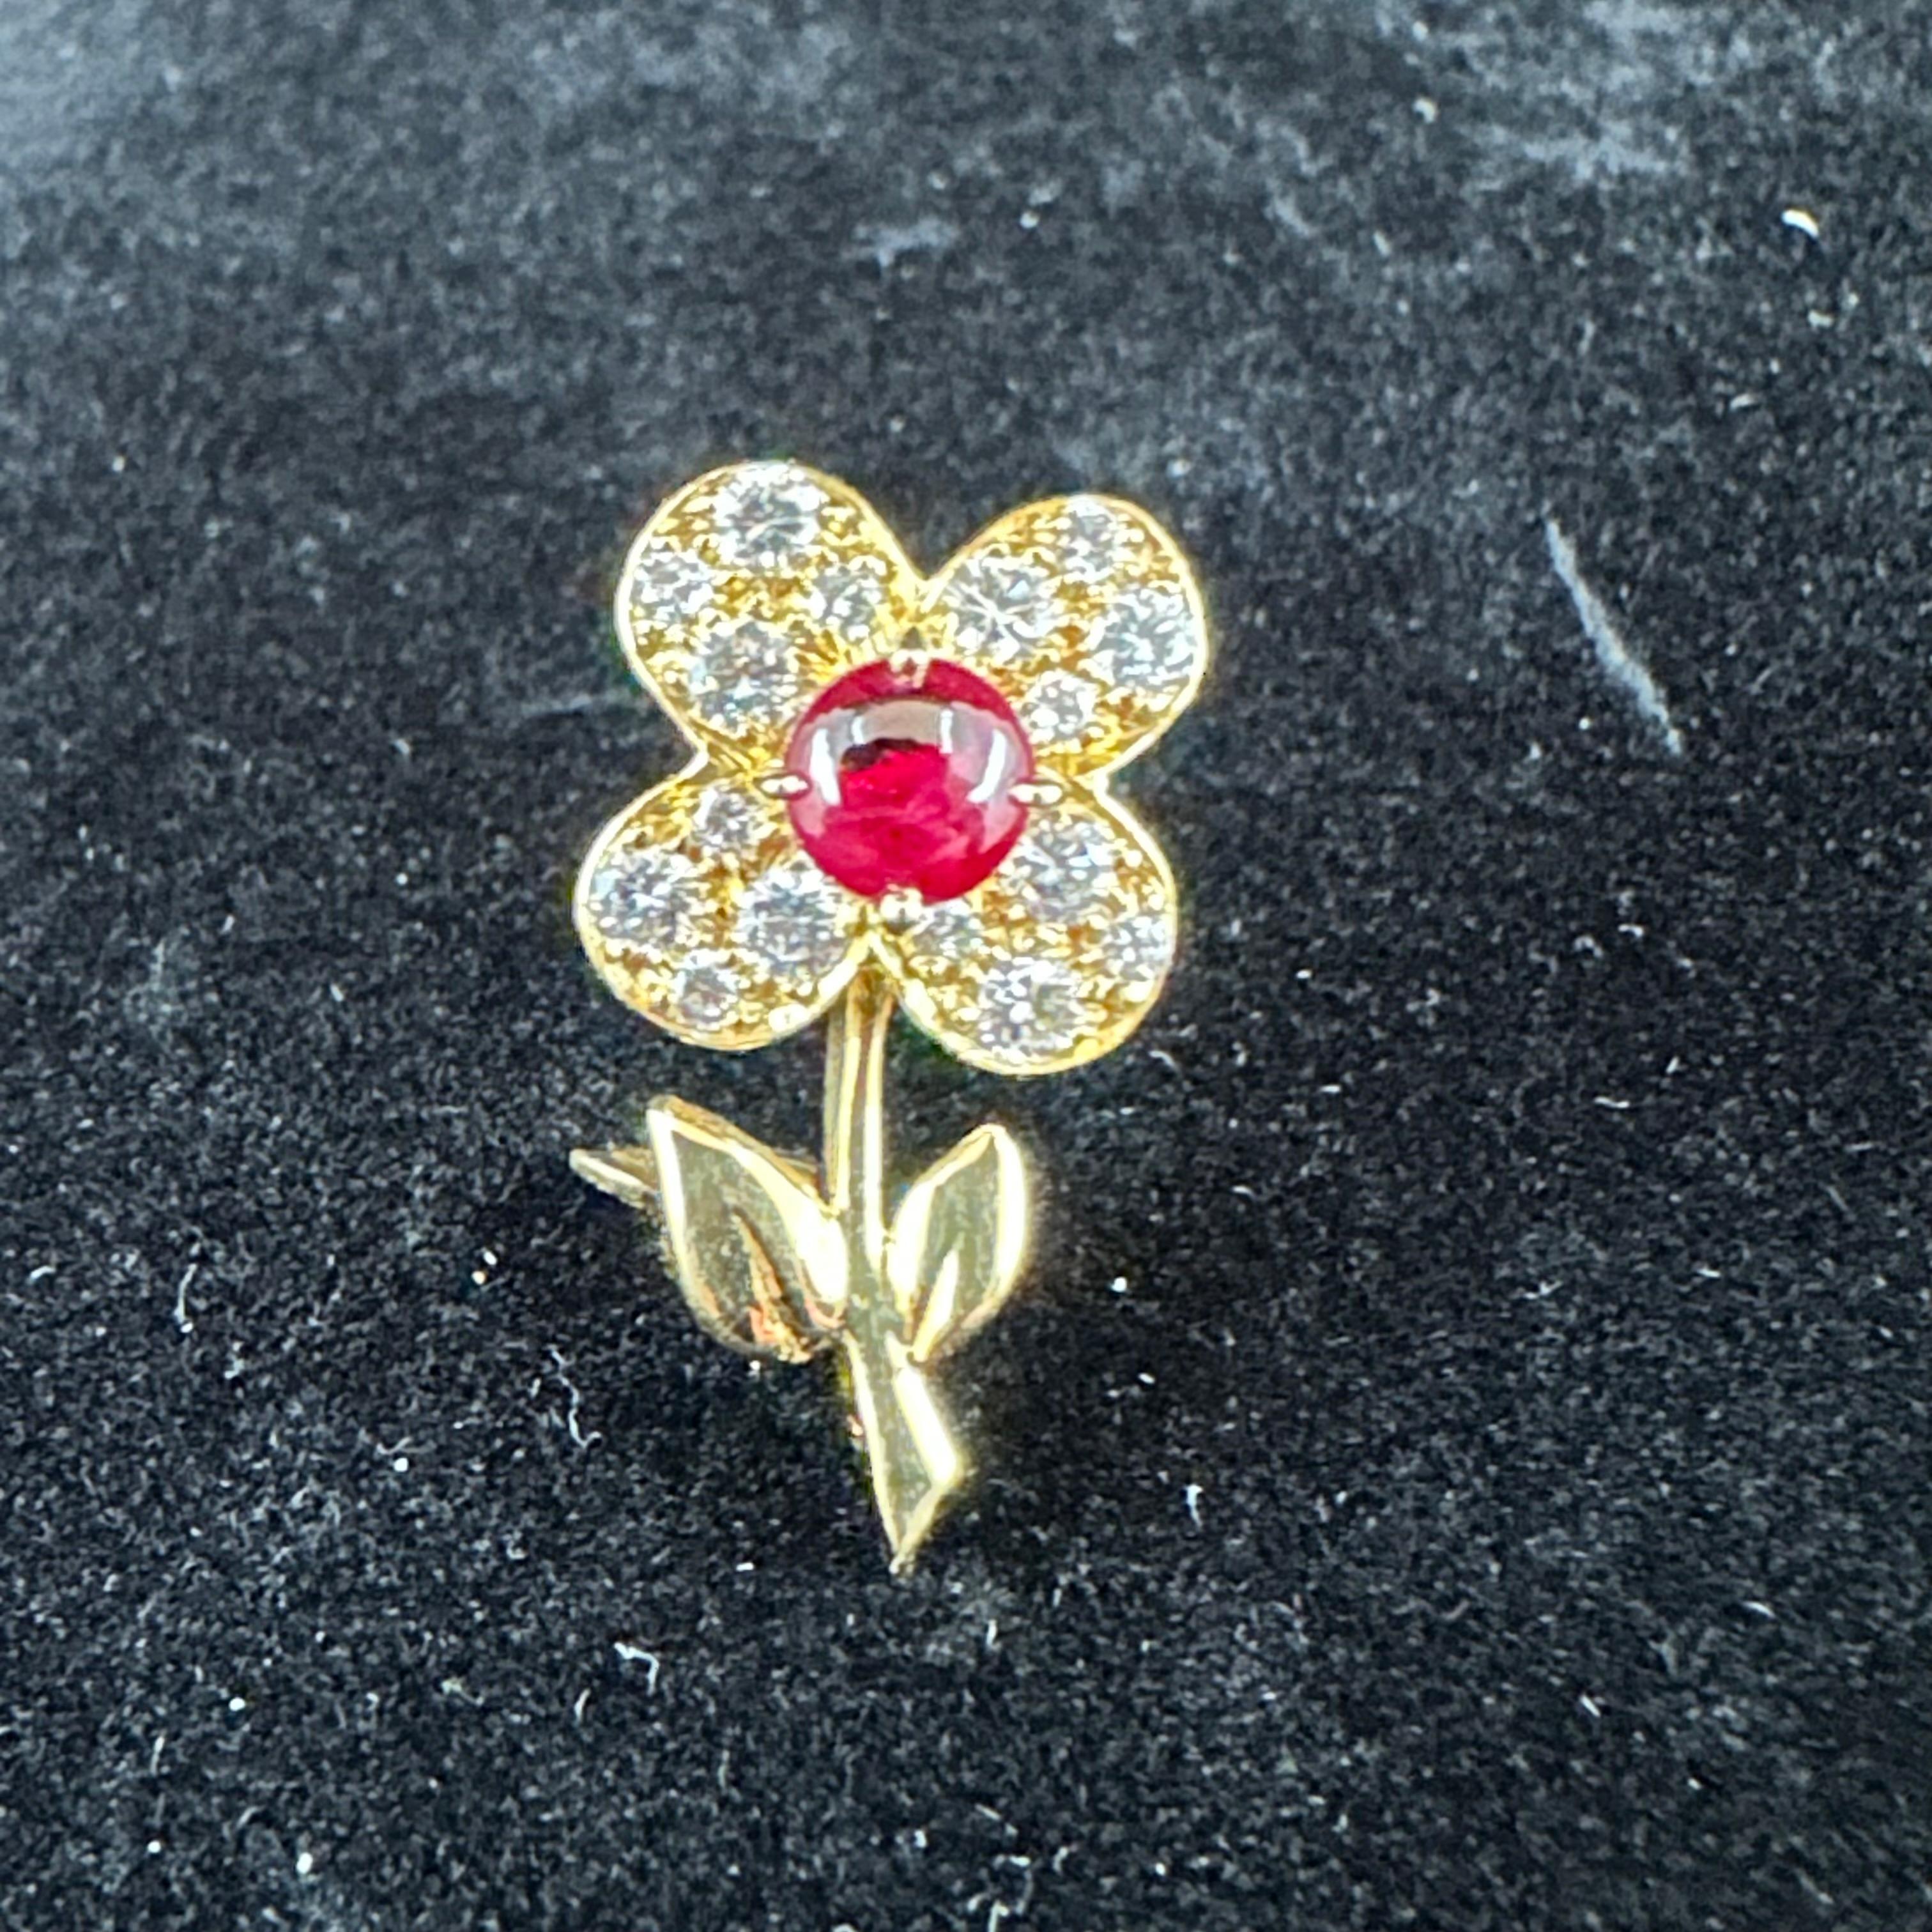 Van Cleef & Arpels Ruby Diamond Pin 18k Yellow Gold In Excellent Condition For Sale In Beverly Hills, CA